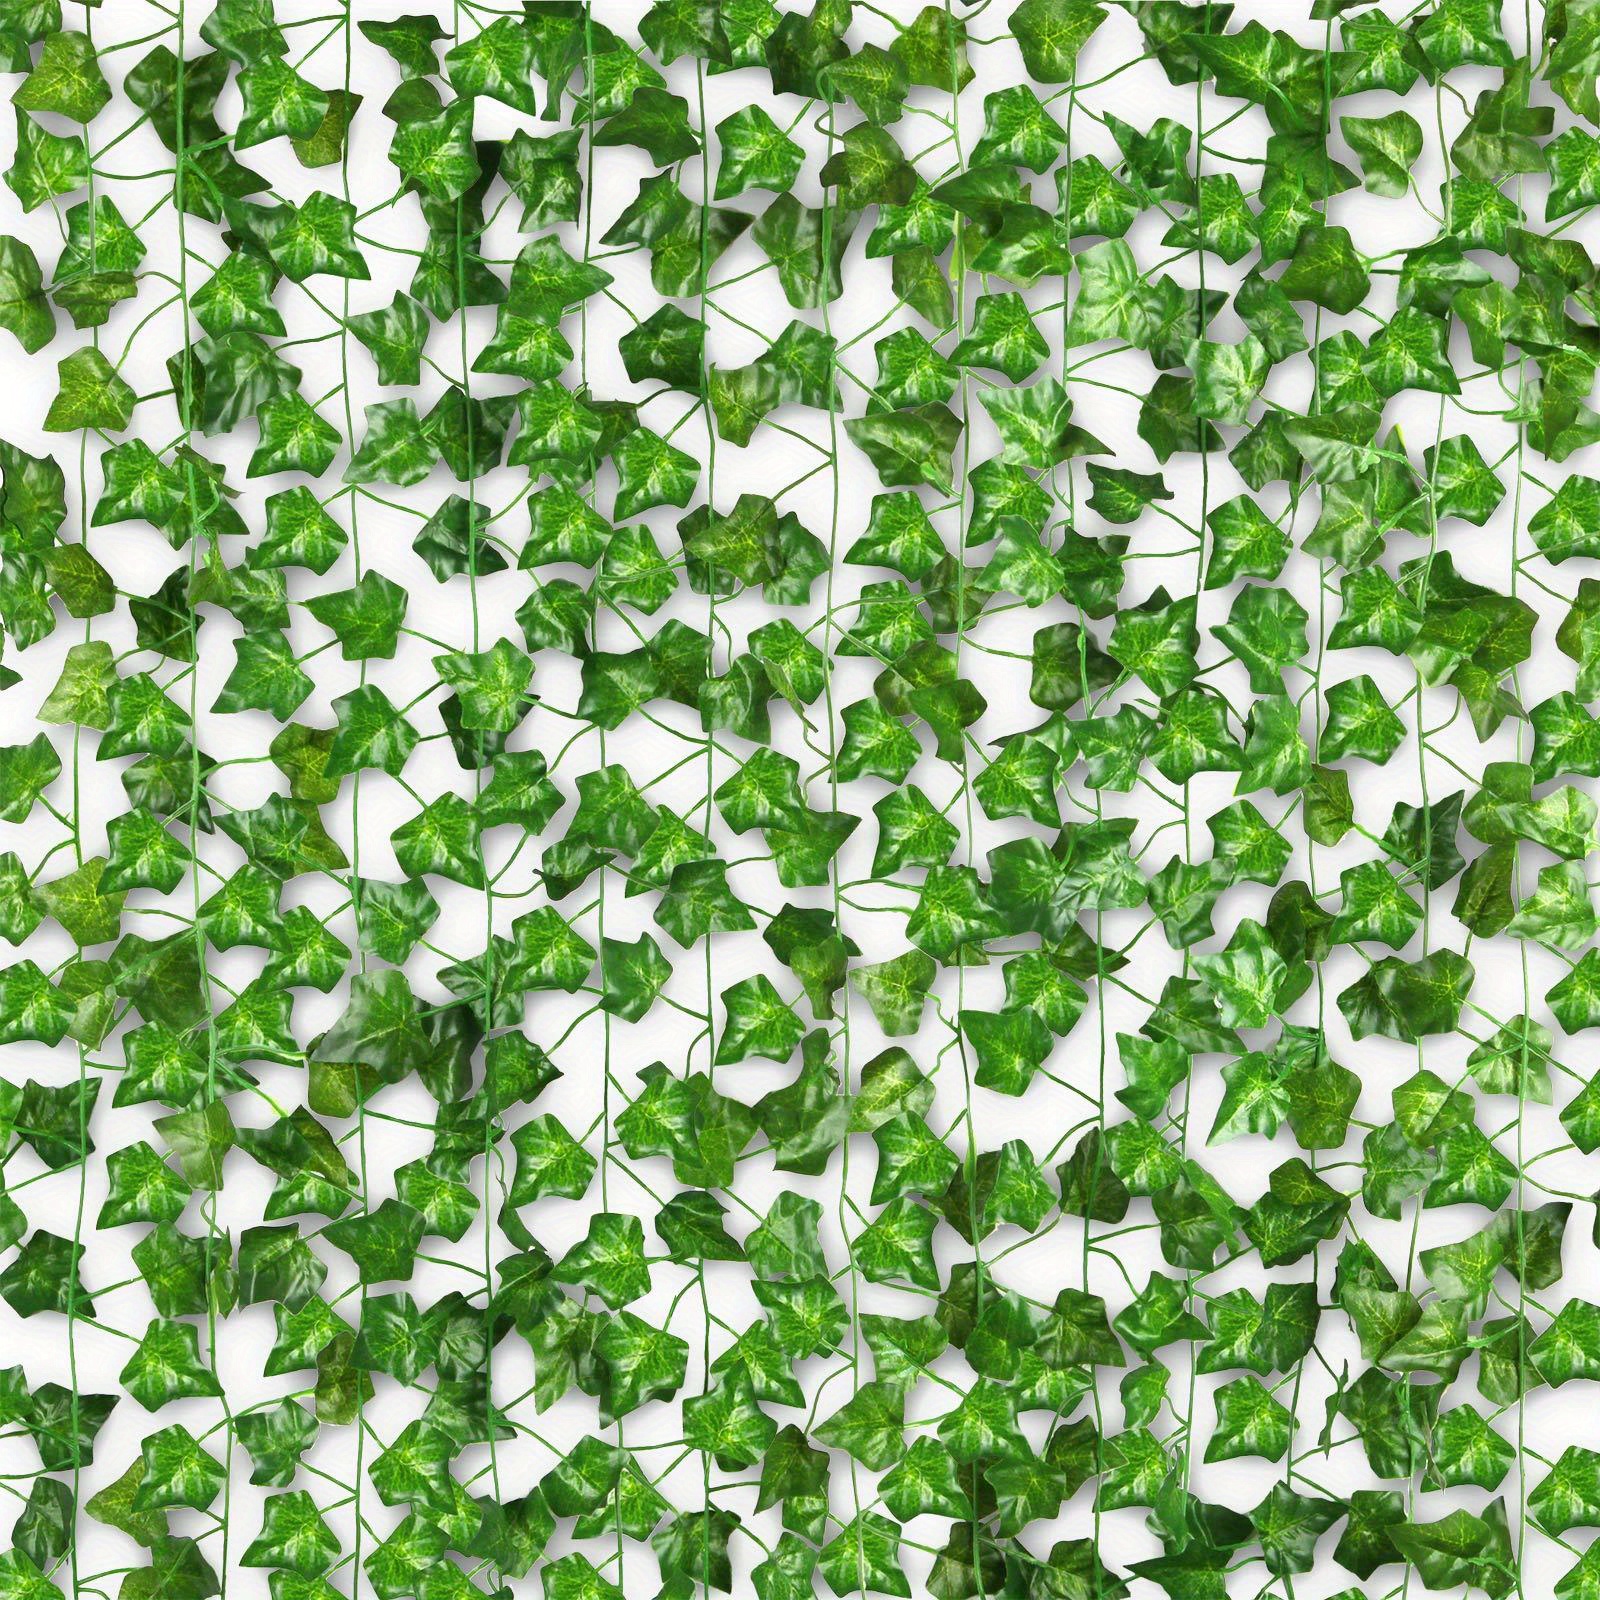 Fake Vines Fake Ivy Leaves Artificial Ivy, Ivy Garland Greenery Vines for  Bedroom Decor Aesthetic Silk Ivy Vines for Room Wall Home Decoration 